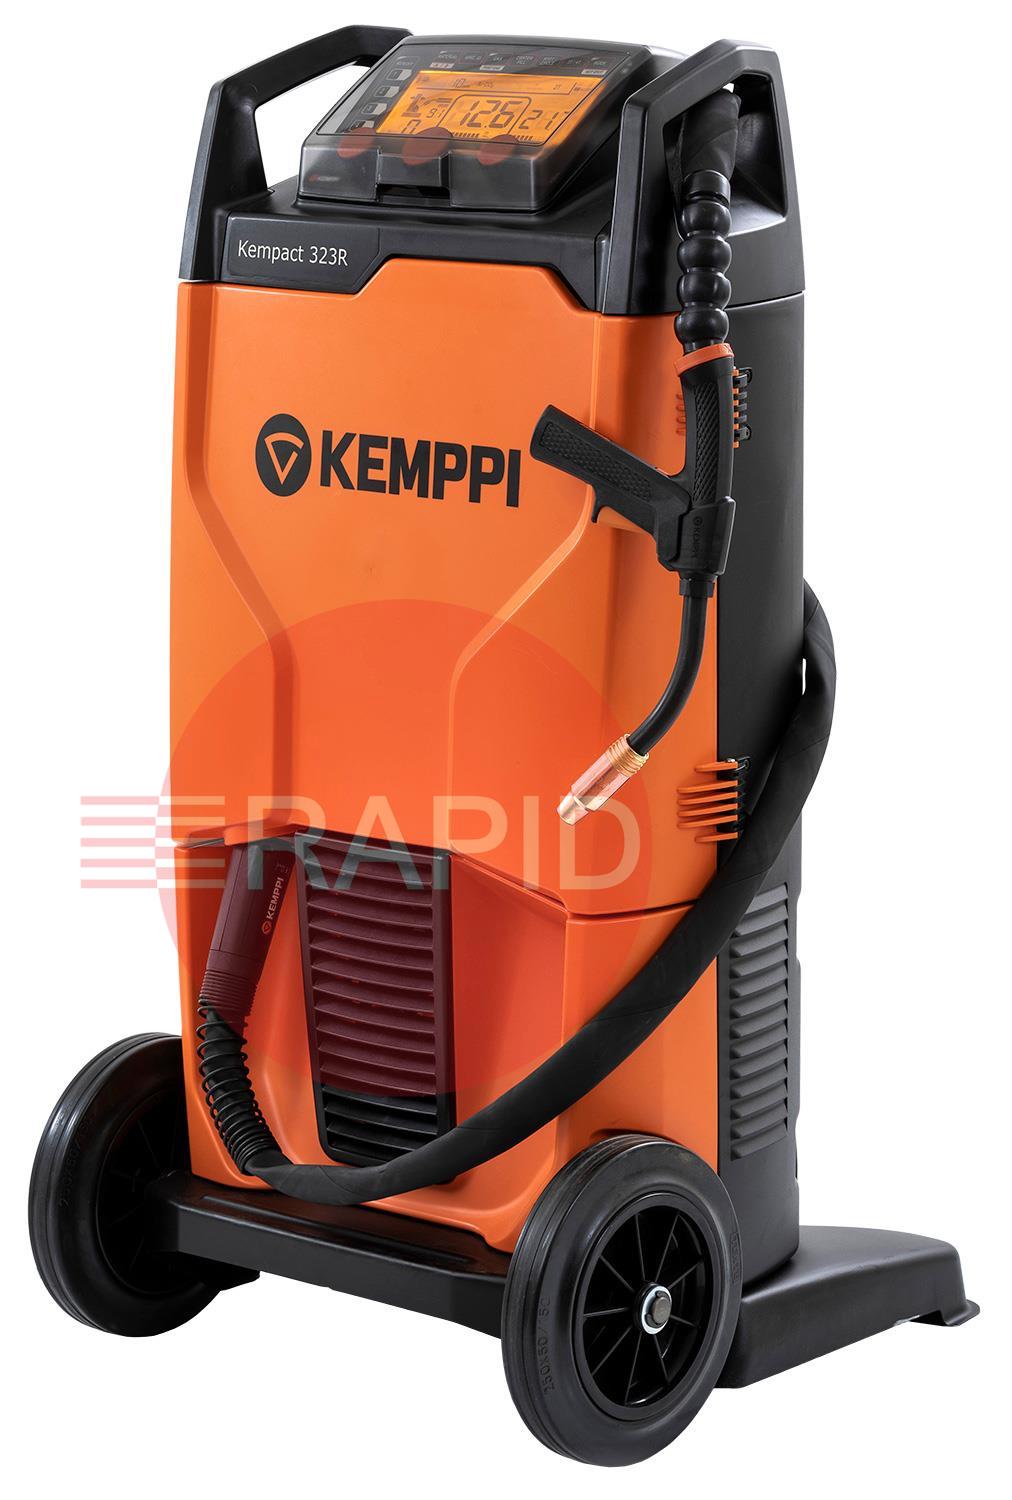 P2211GXE  Kemppi Kempact RA 323R, 320A 3 Phase 400v Mig Welder, with Flexlite GXe 405G 3.5m Torch